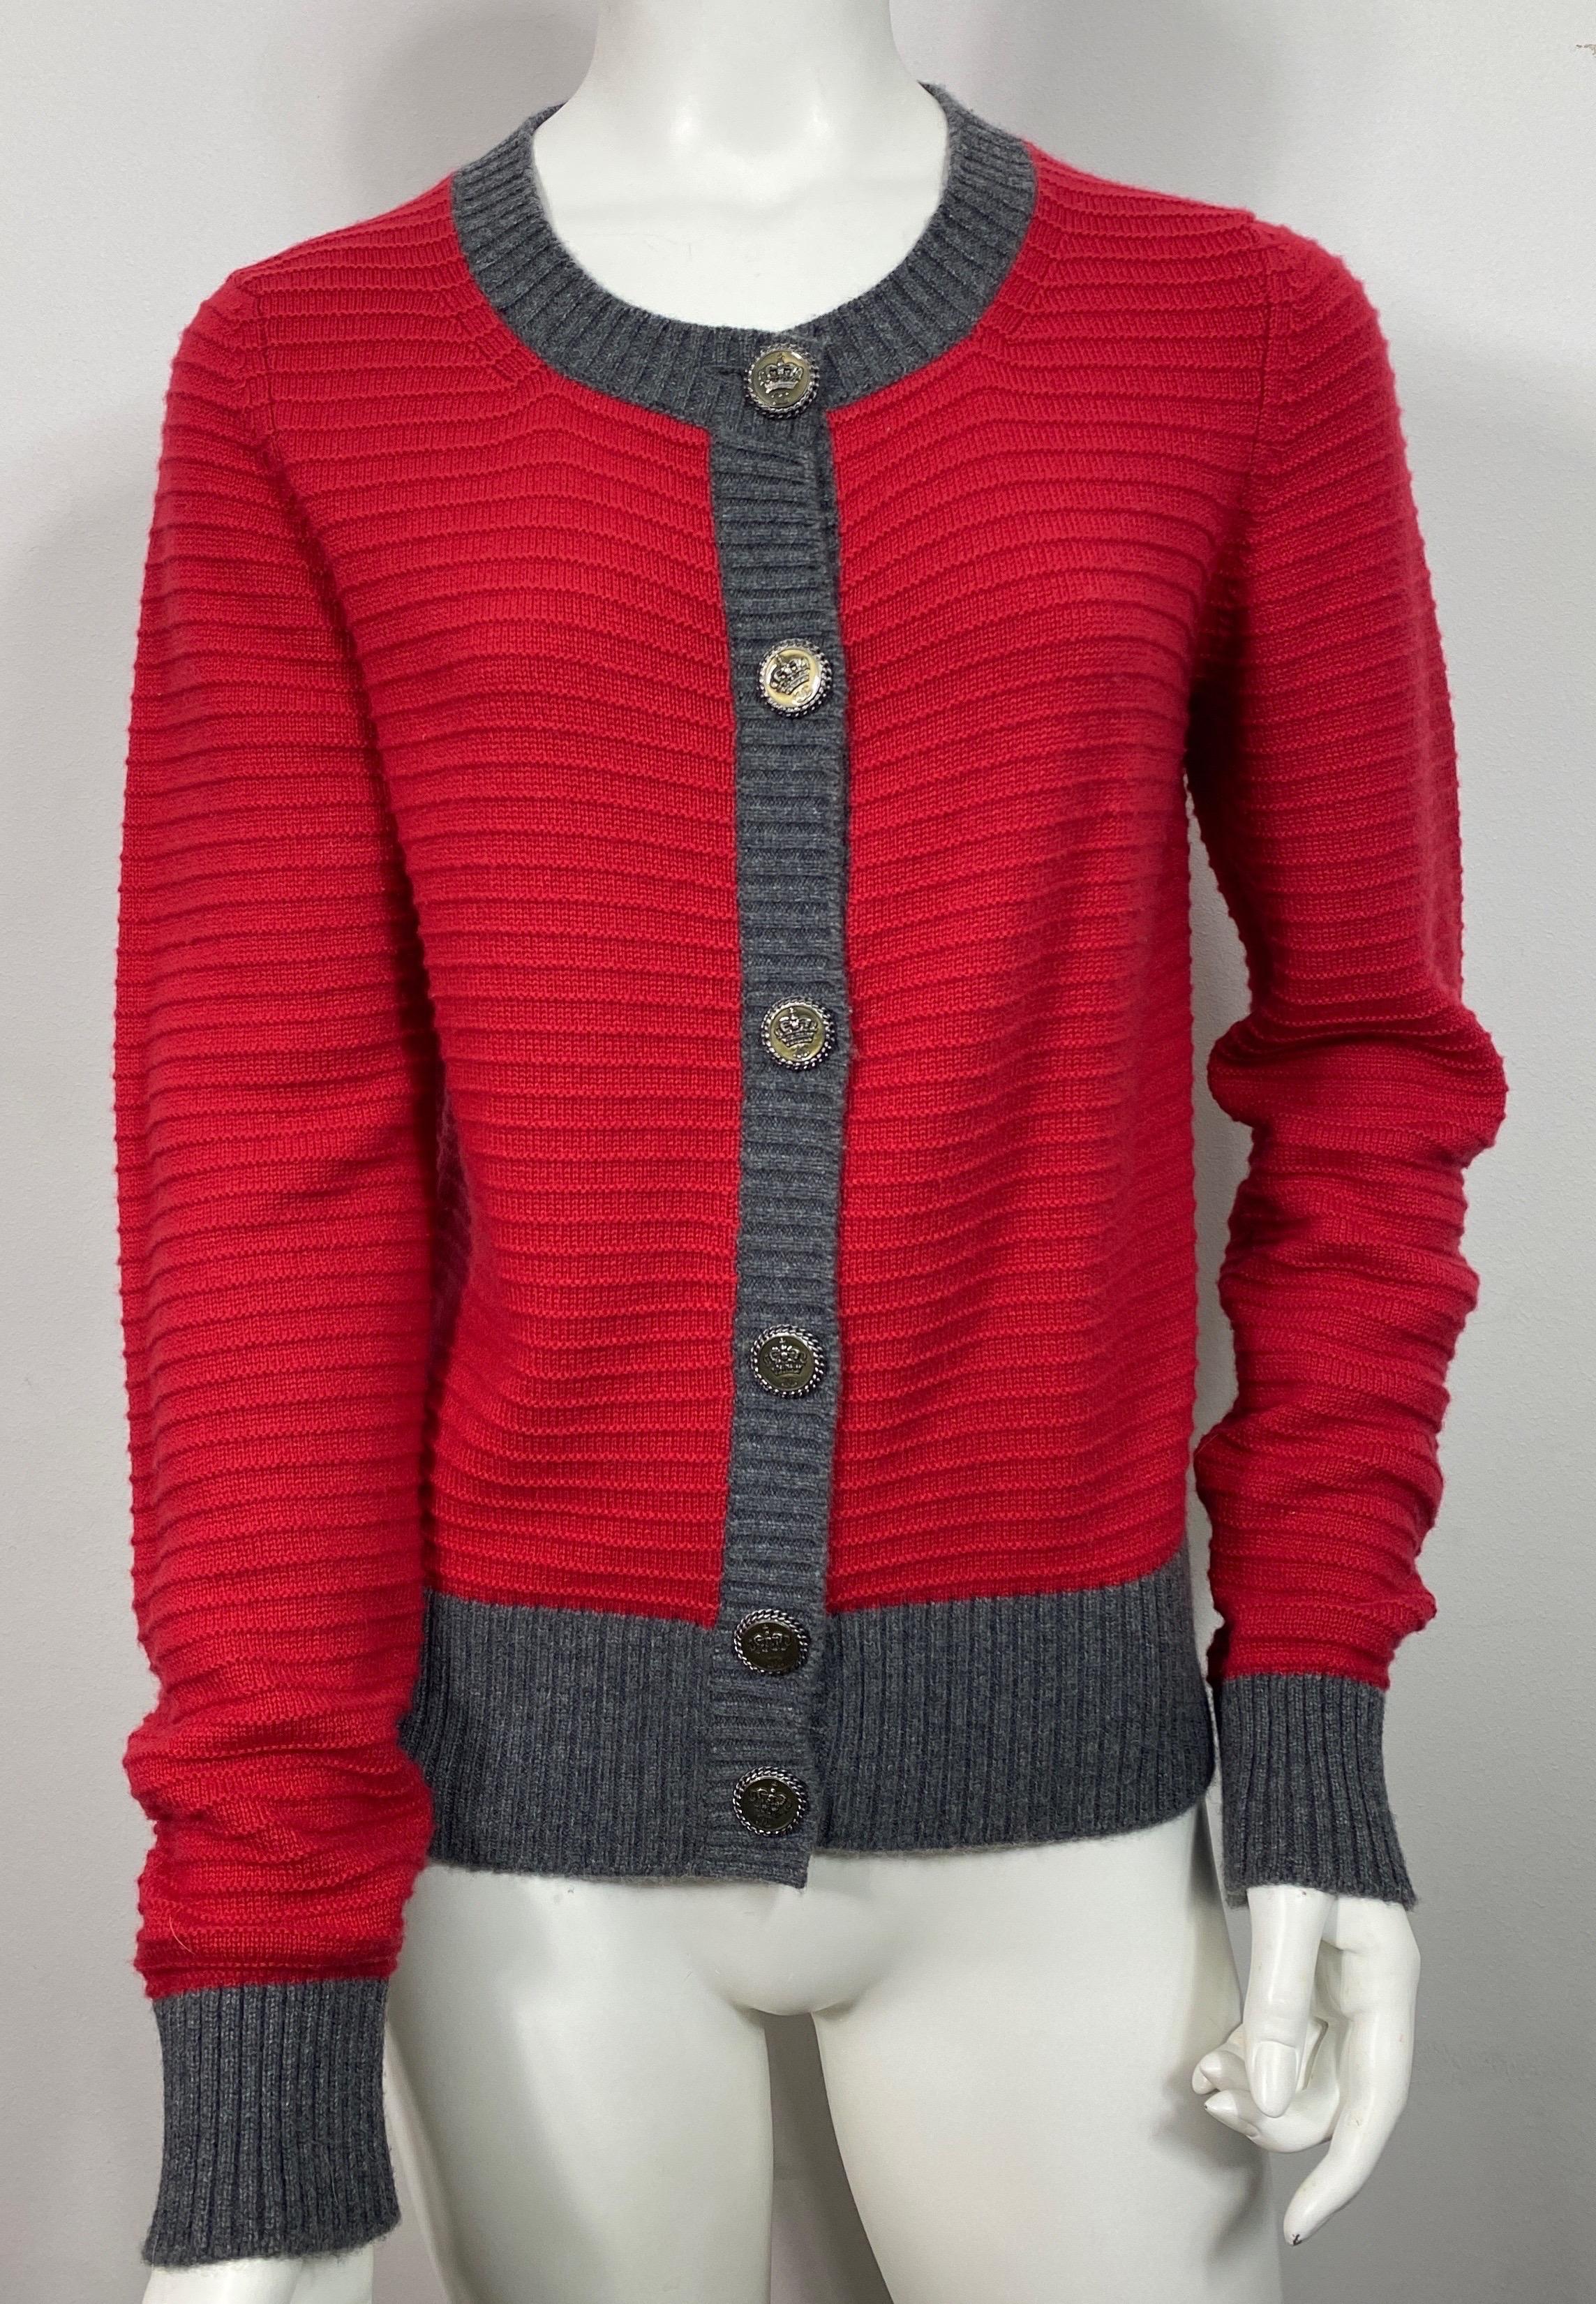 Chanel 2008A Red and Grey Ribbed Knit Cashmere Cardigan-Size 42 This very collectible Chanel ribbed knit cashmere is from the 2008 Autumn Collection by Karl Lagerfeld. The 100% cashmere cardigan has a ribbed like knit texture to it, the majority of